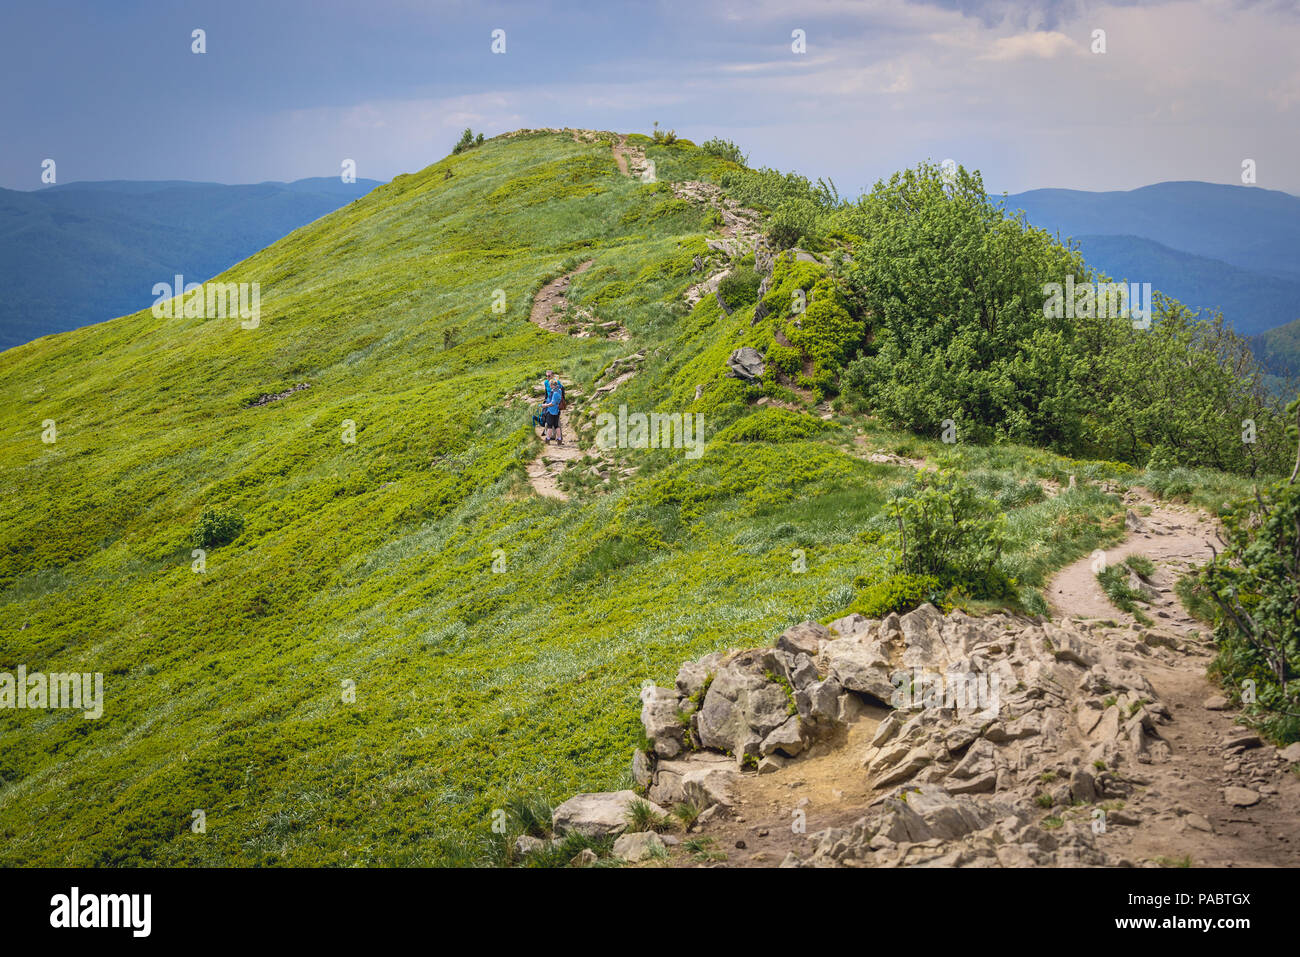 View from Osadzki Wierch Mount on the Wetlina High Mountain Pasture in Western Bieszczady Mountains in Poland Stock Photo